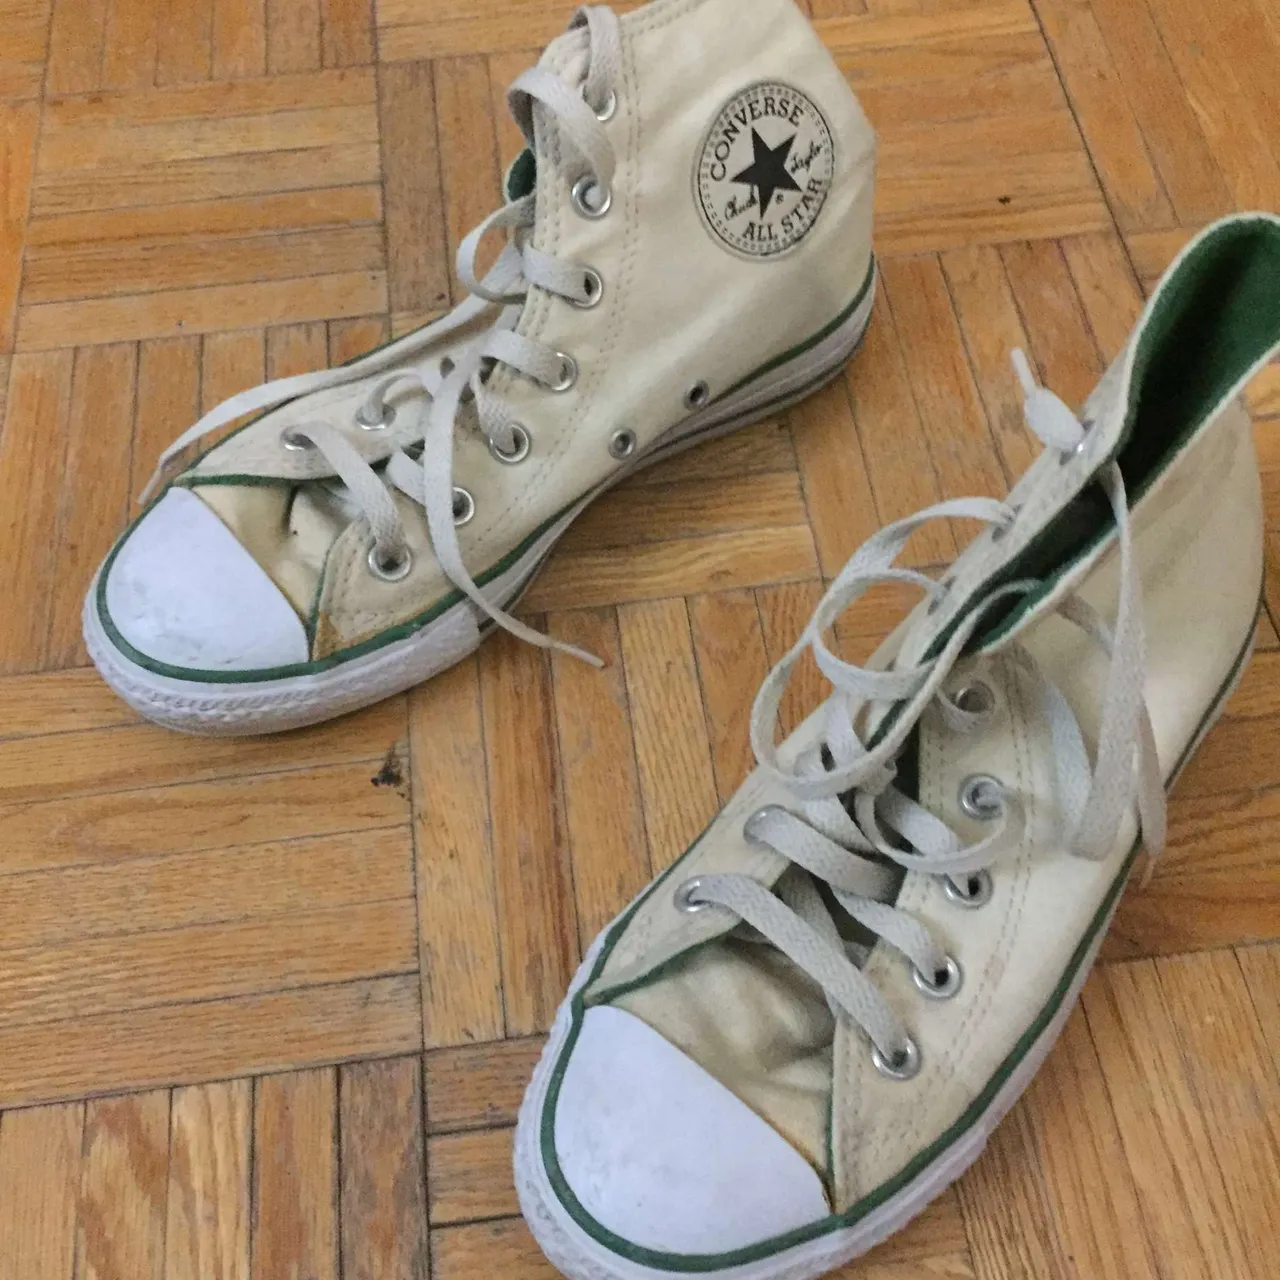 Converse All Stars - Eggshell and green photo 1